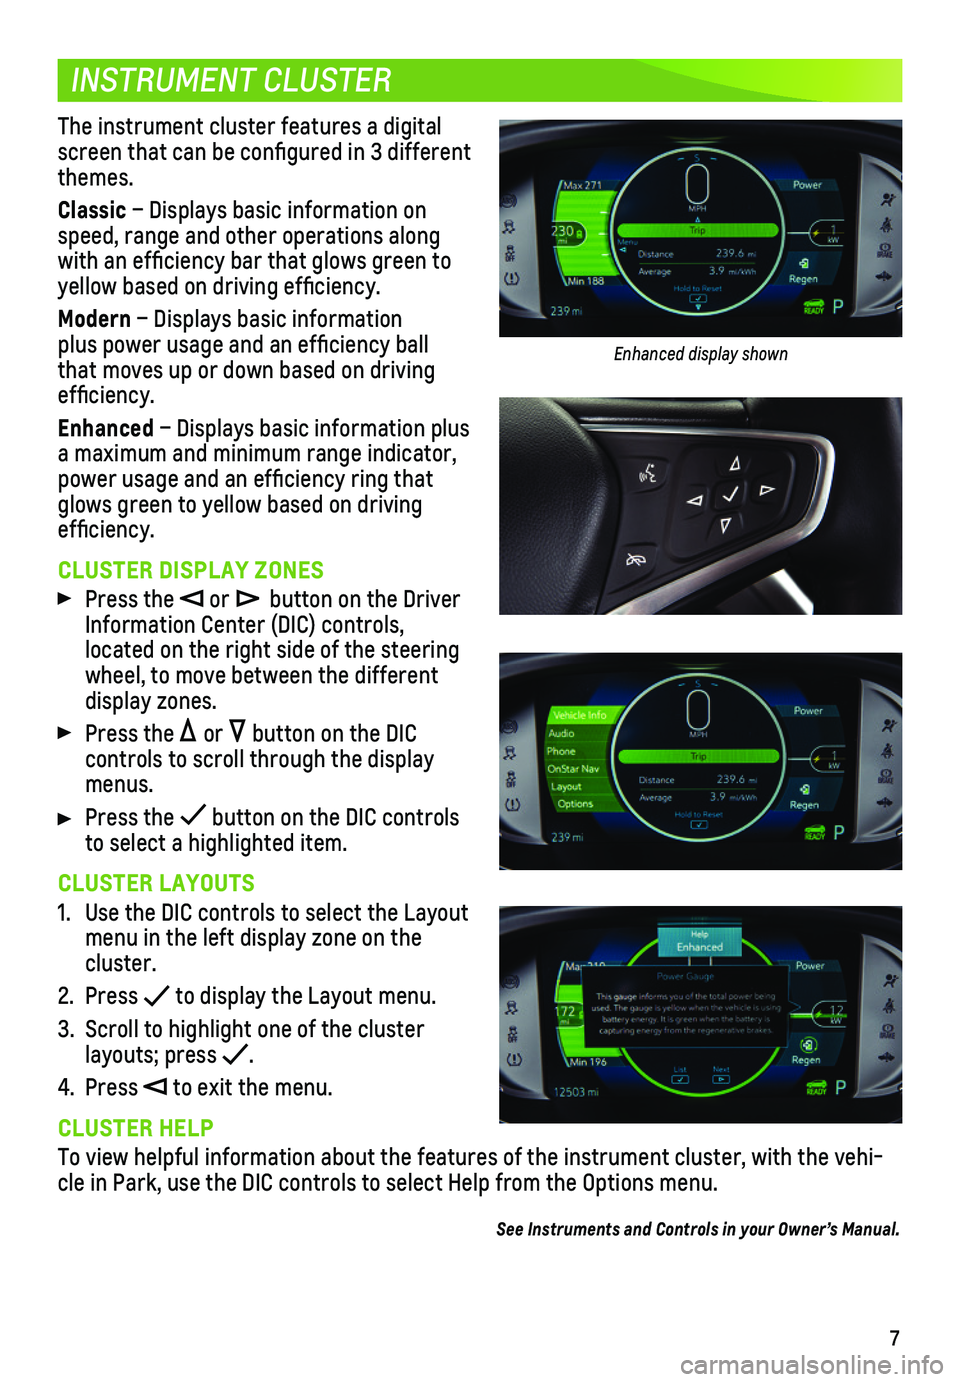 CHEVROLET BOLT EV 2020  Get To Know Guide 7
INSTRUMENT CLUSTER
The instrument cluster features a digital screen that can be configured in 3 different themes.
Classic – Displays basic information on speed, range and other operations along wi